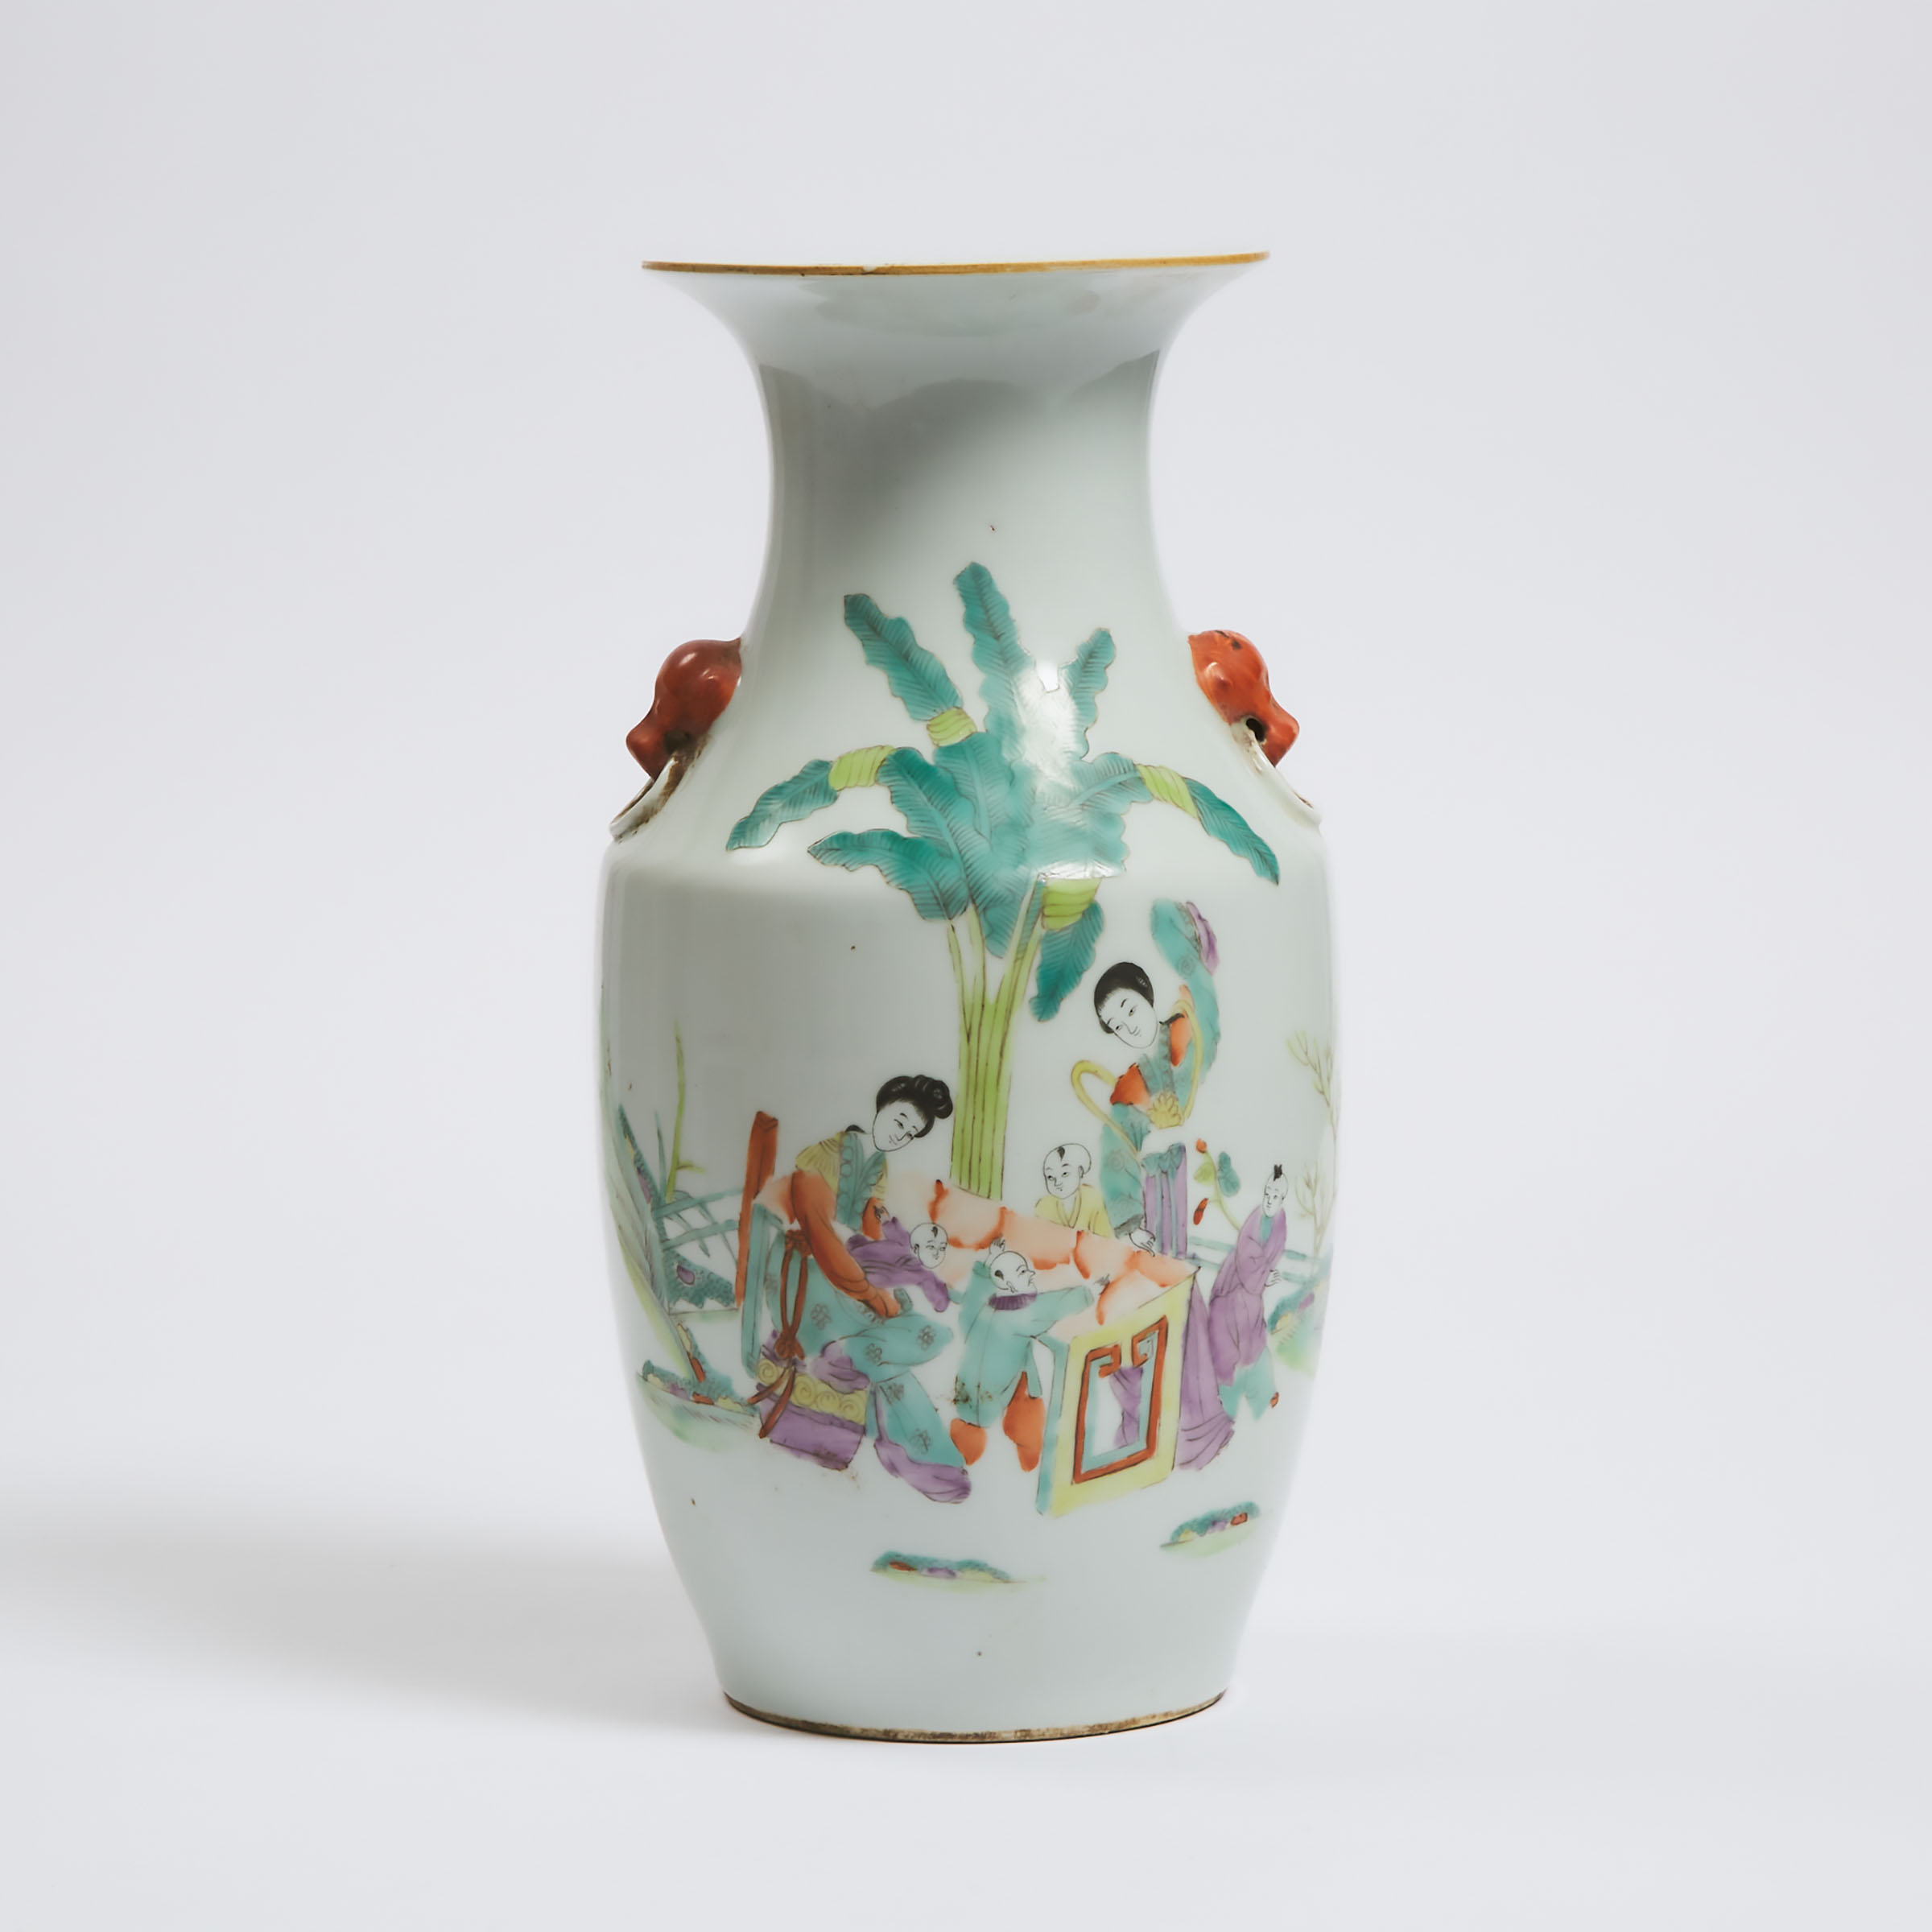 A Chinese Enameled 'Figures and Calligraphy' Vase, Republican Period, Early 20th Century